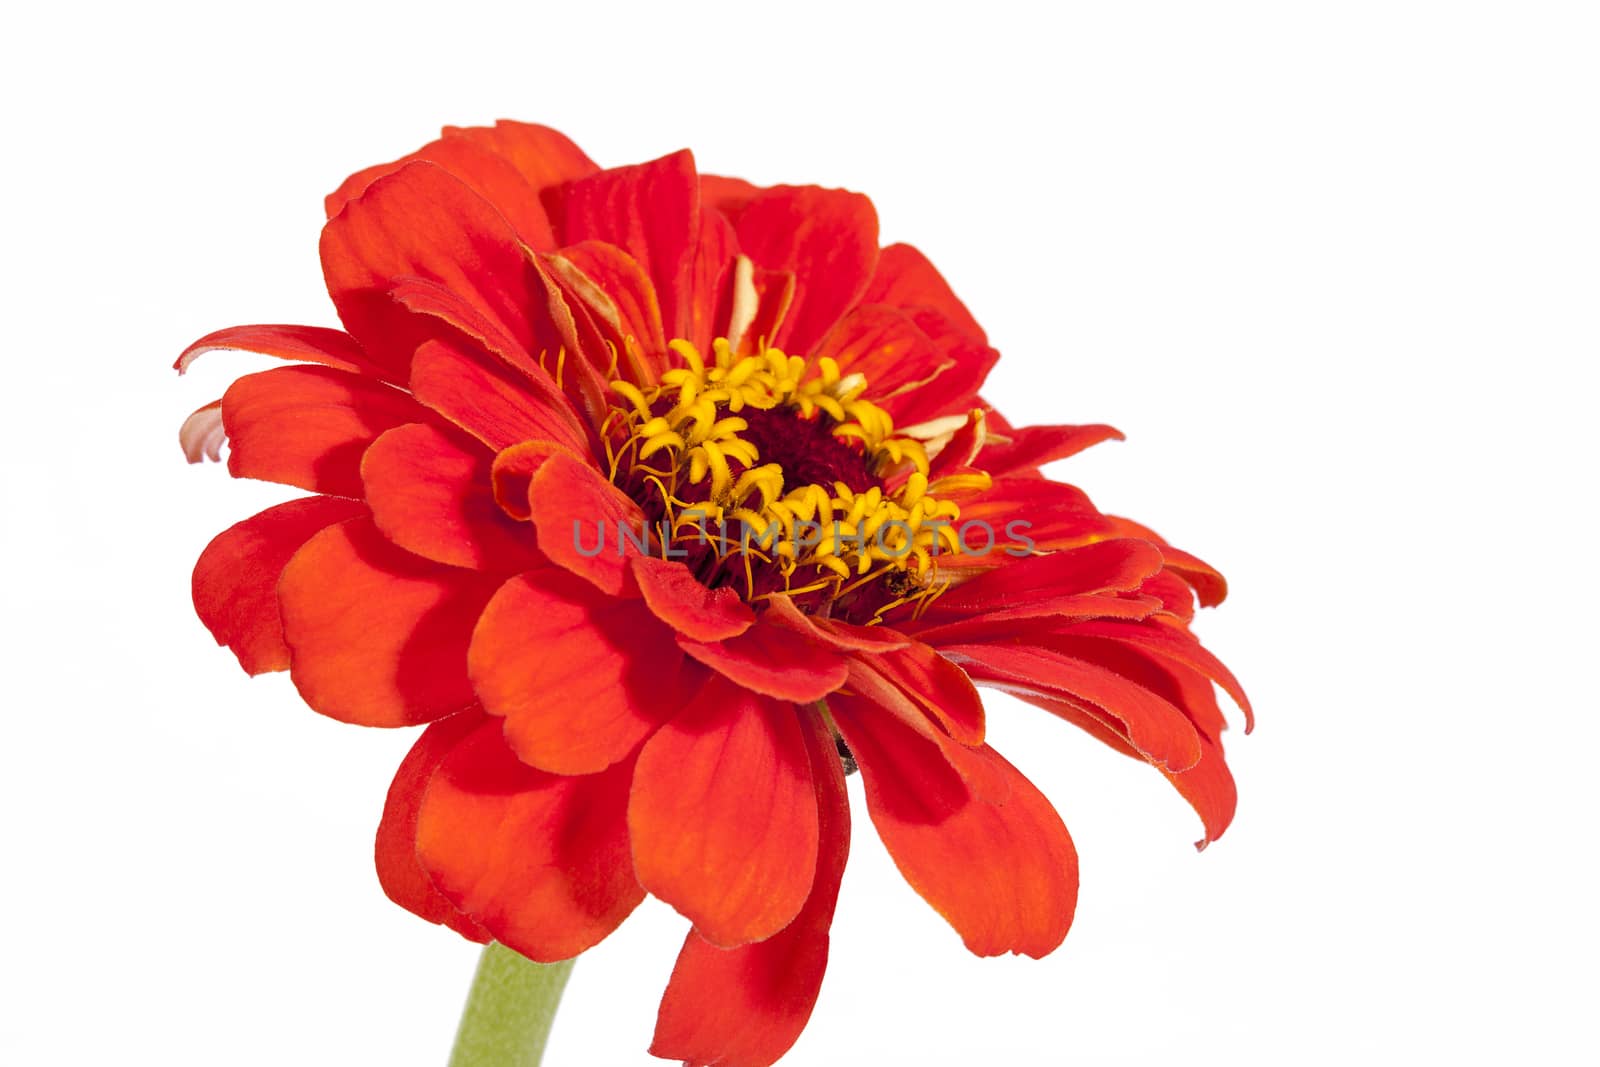 Single flower of red zinnia isolated on white background by mychadre77